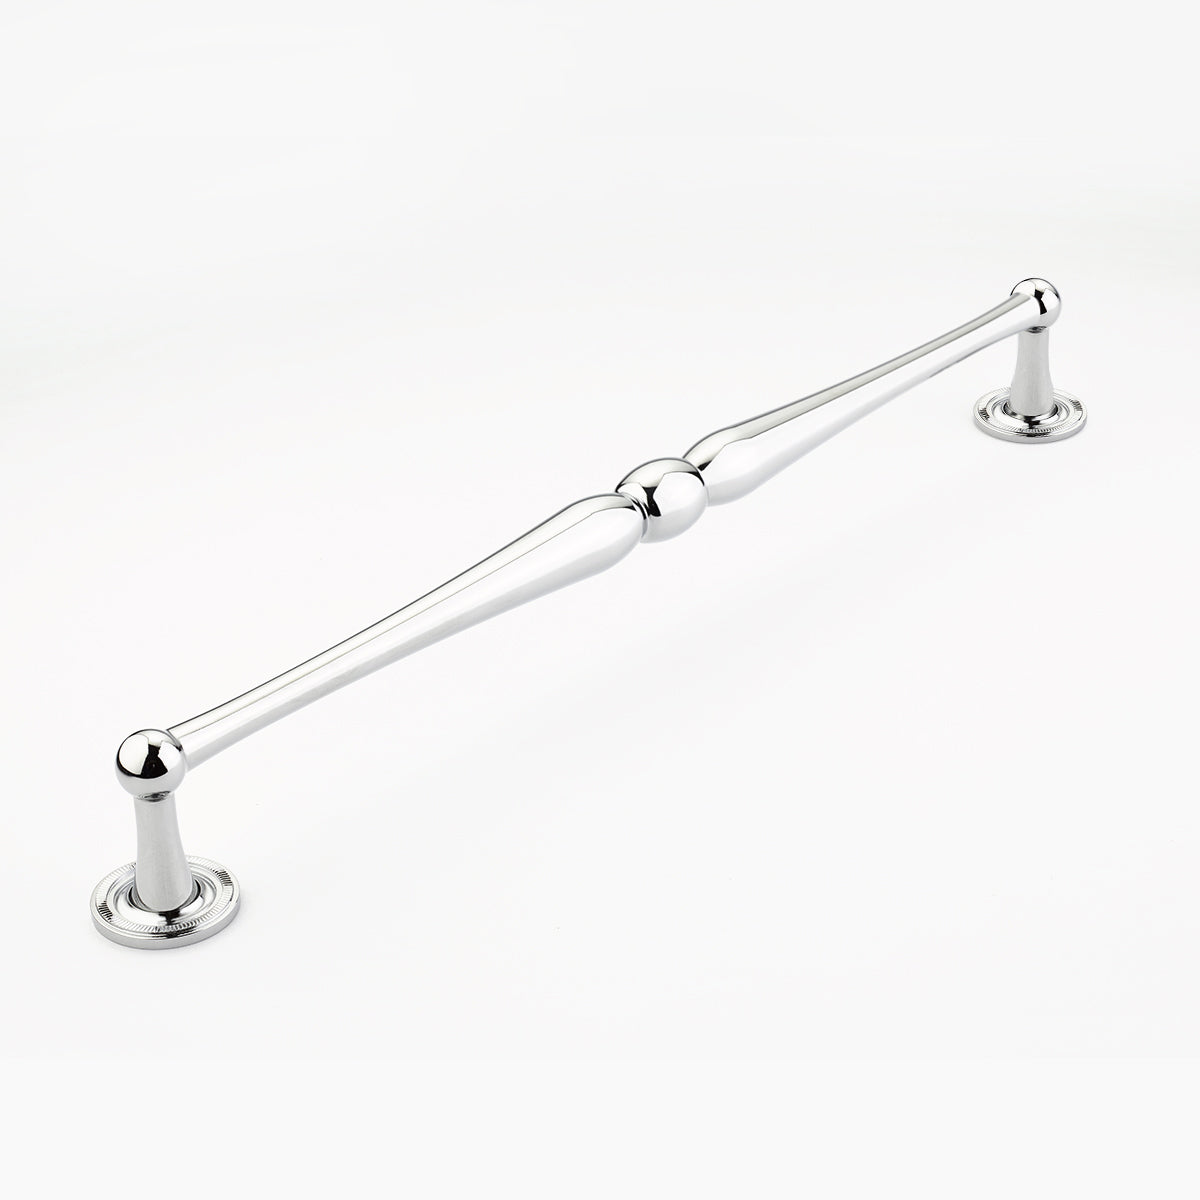 15 3/4 Inch (15 Inch c-c) Atherton Appliance Pull with Knurled Footplates (Polished Chrome Finish)